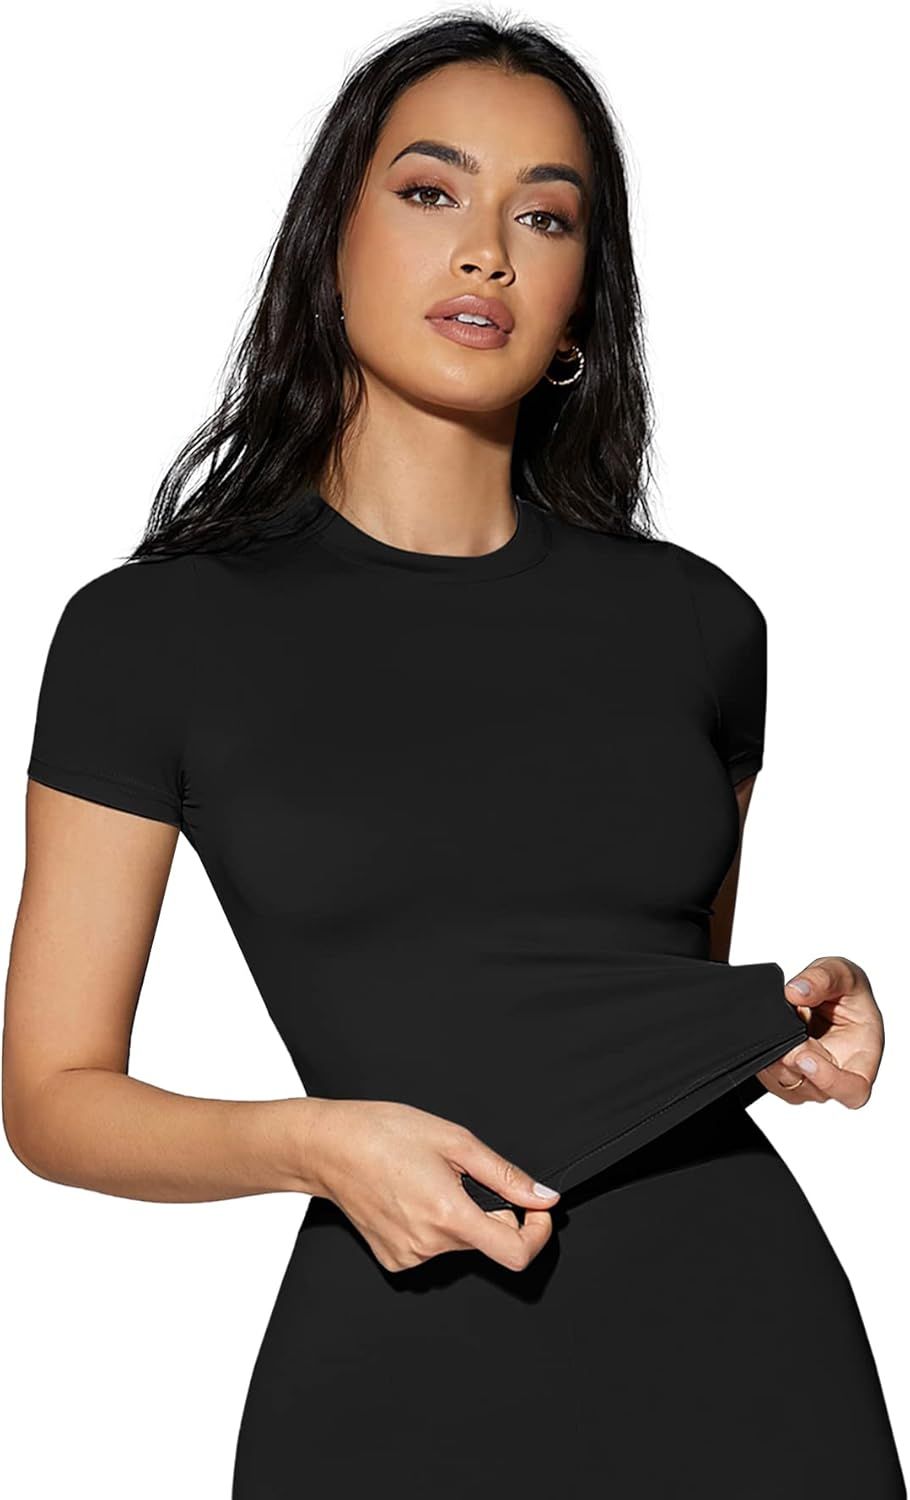 SOLY HUX Women's Casual Short Sleeve Round Neck Crop Tops Slim Fit Tee T Shirts Basic Tops | Amazon (US)